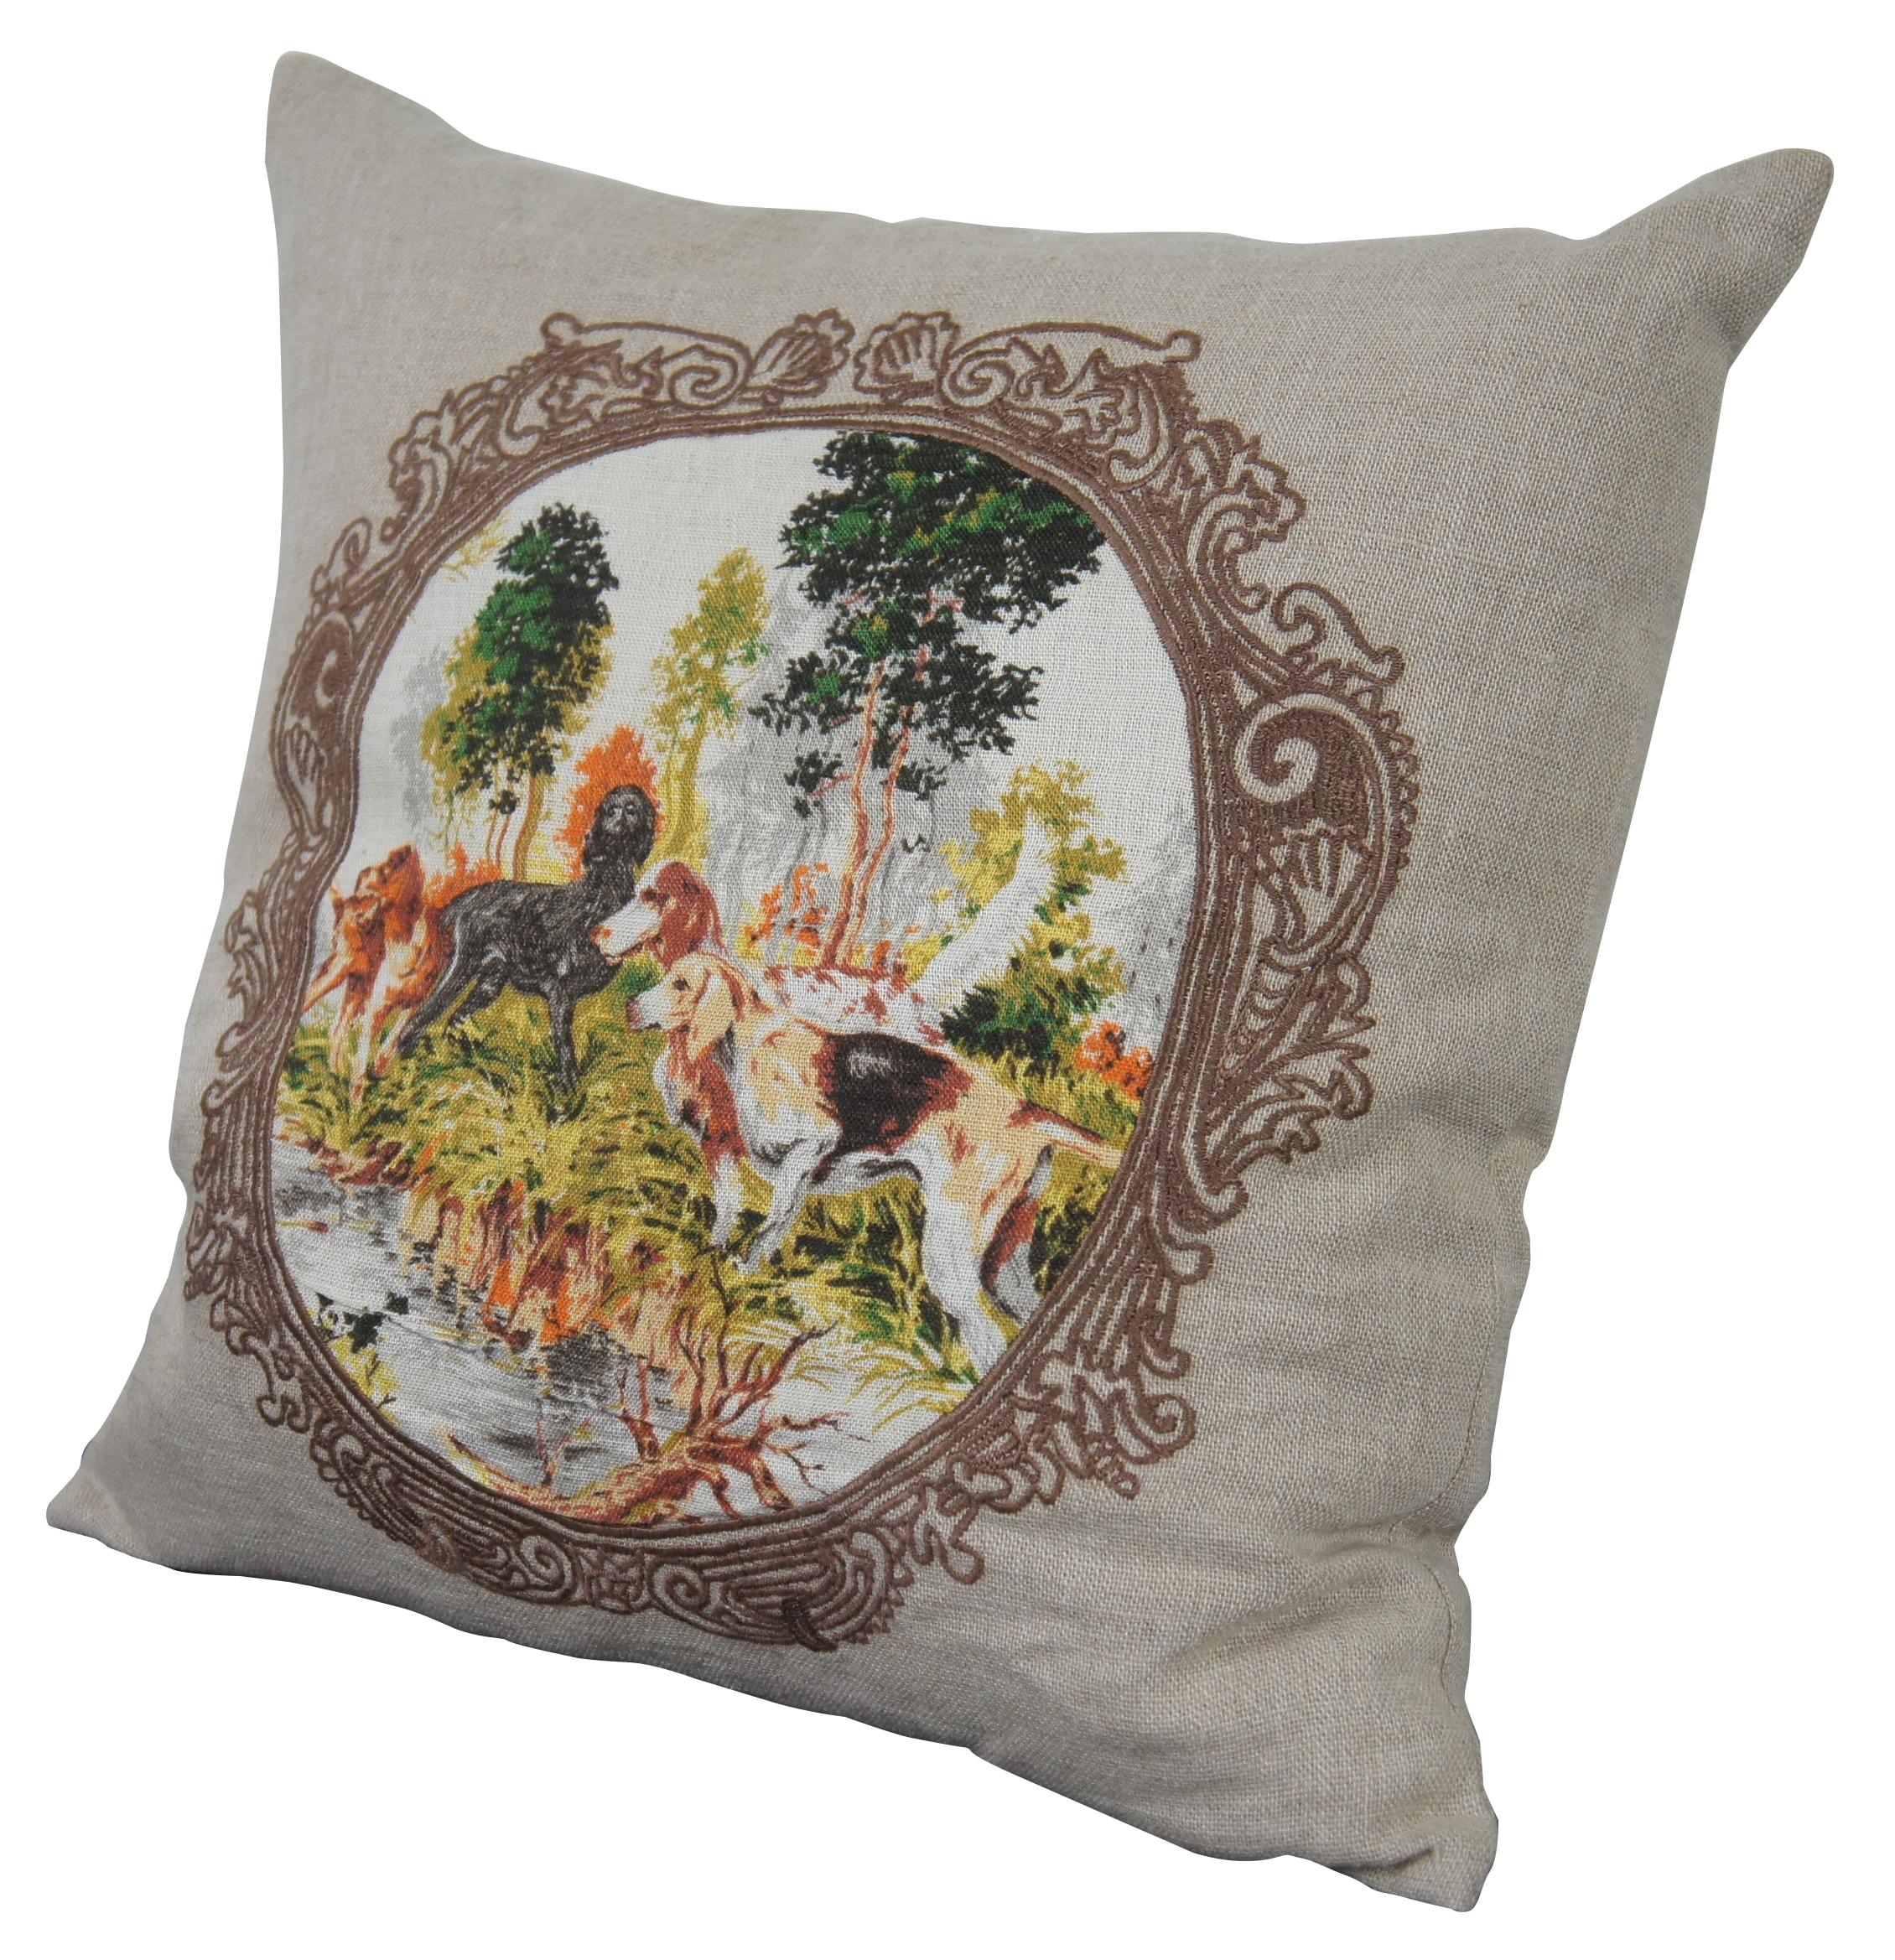 Linen down filled throw pillow by Villa featuring a printed hunting dog scene surrounded by an embroidered frame.
 